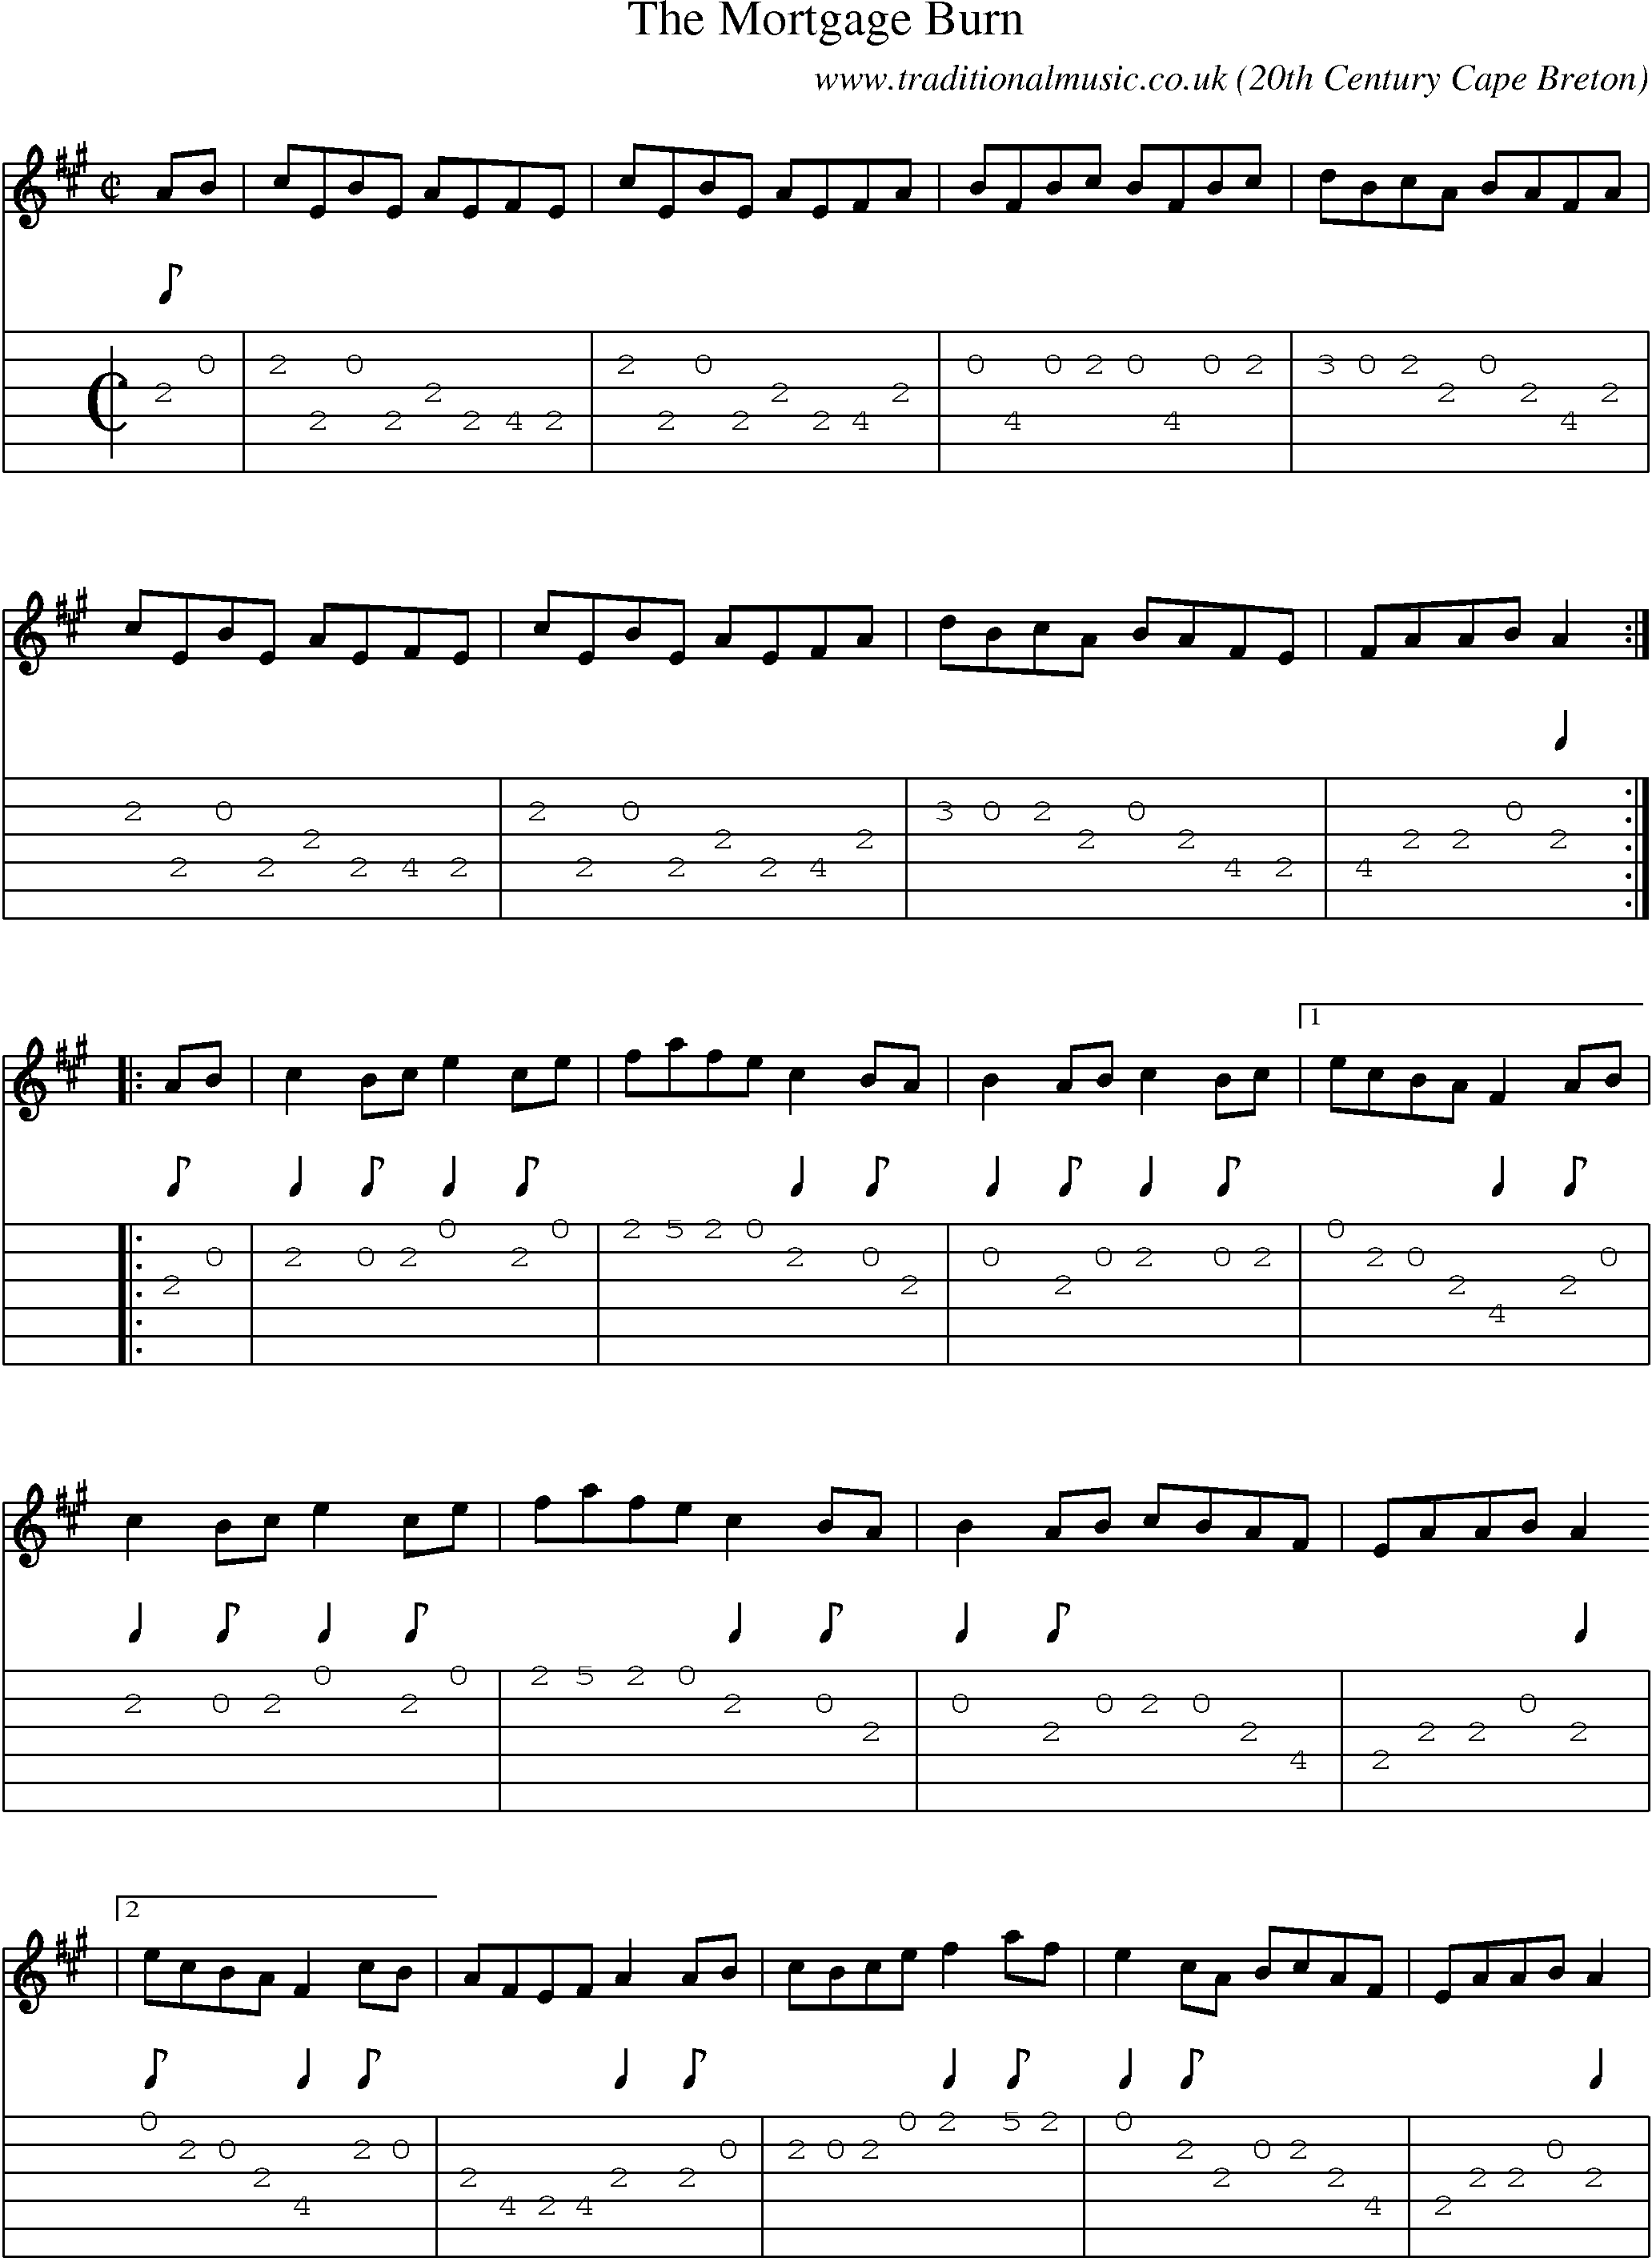 Music Score and Guitar Tabs for The Mortgage Burn